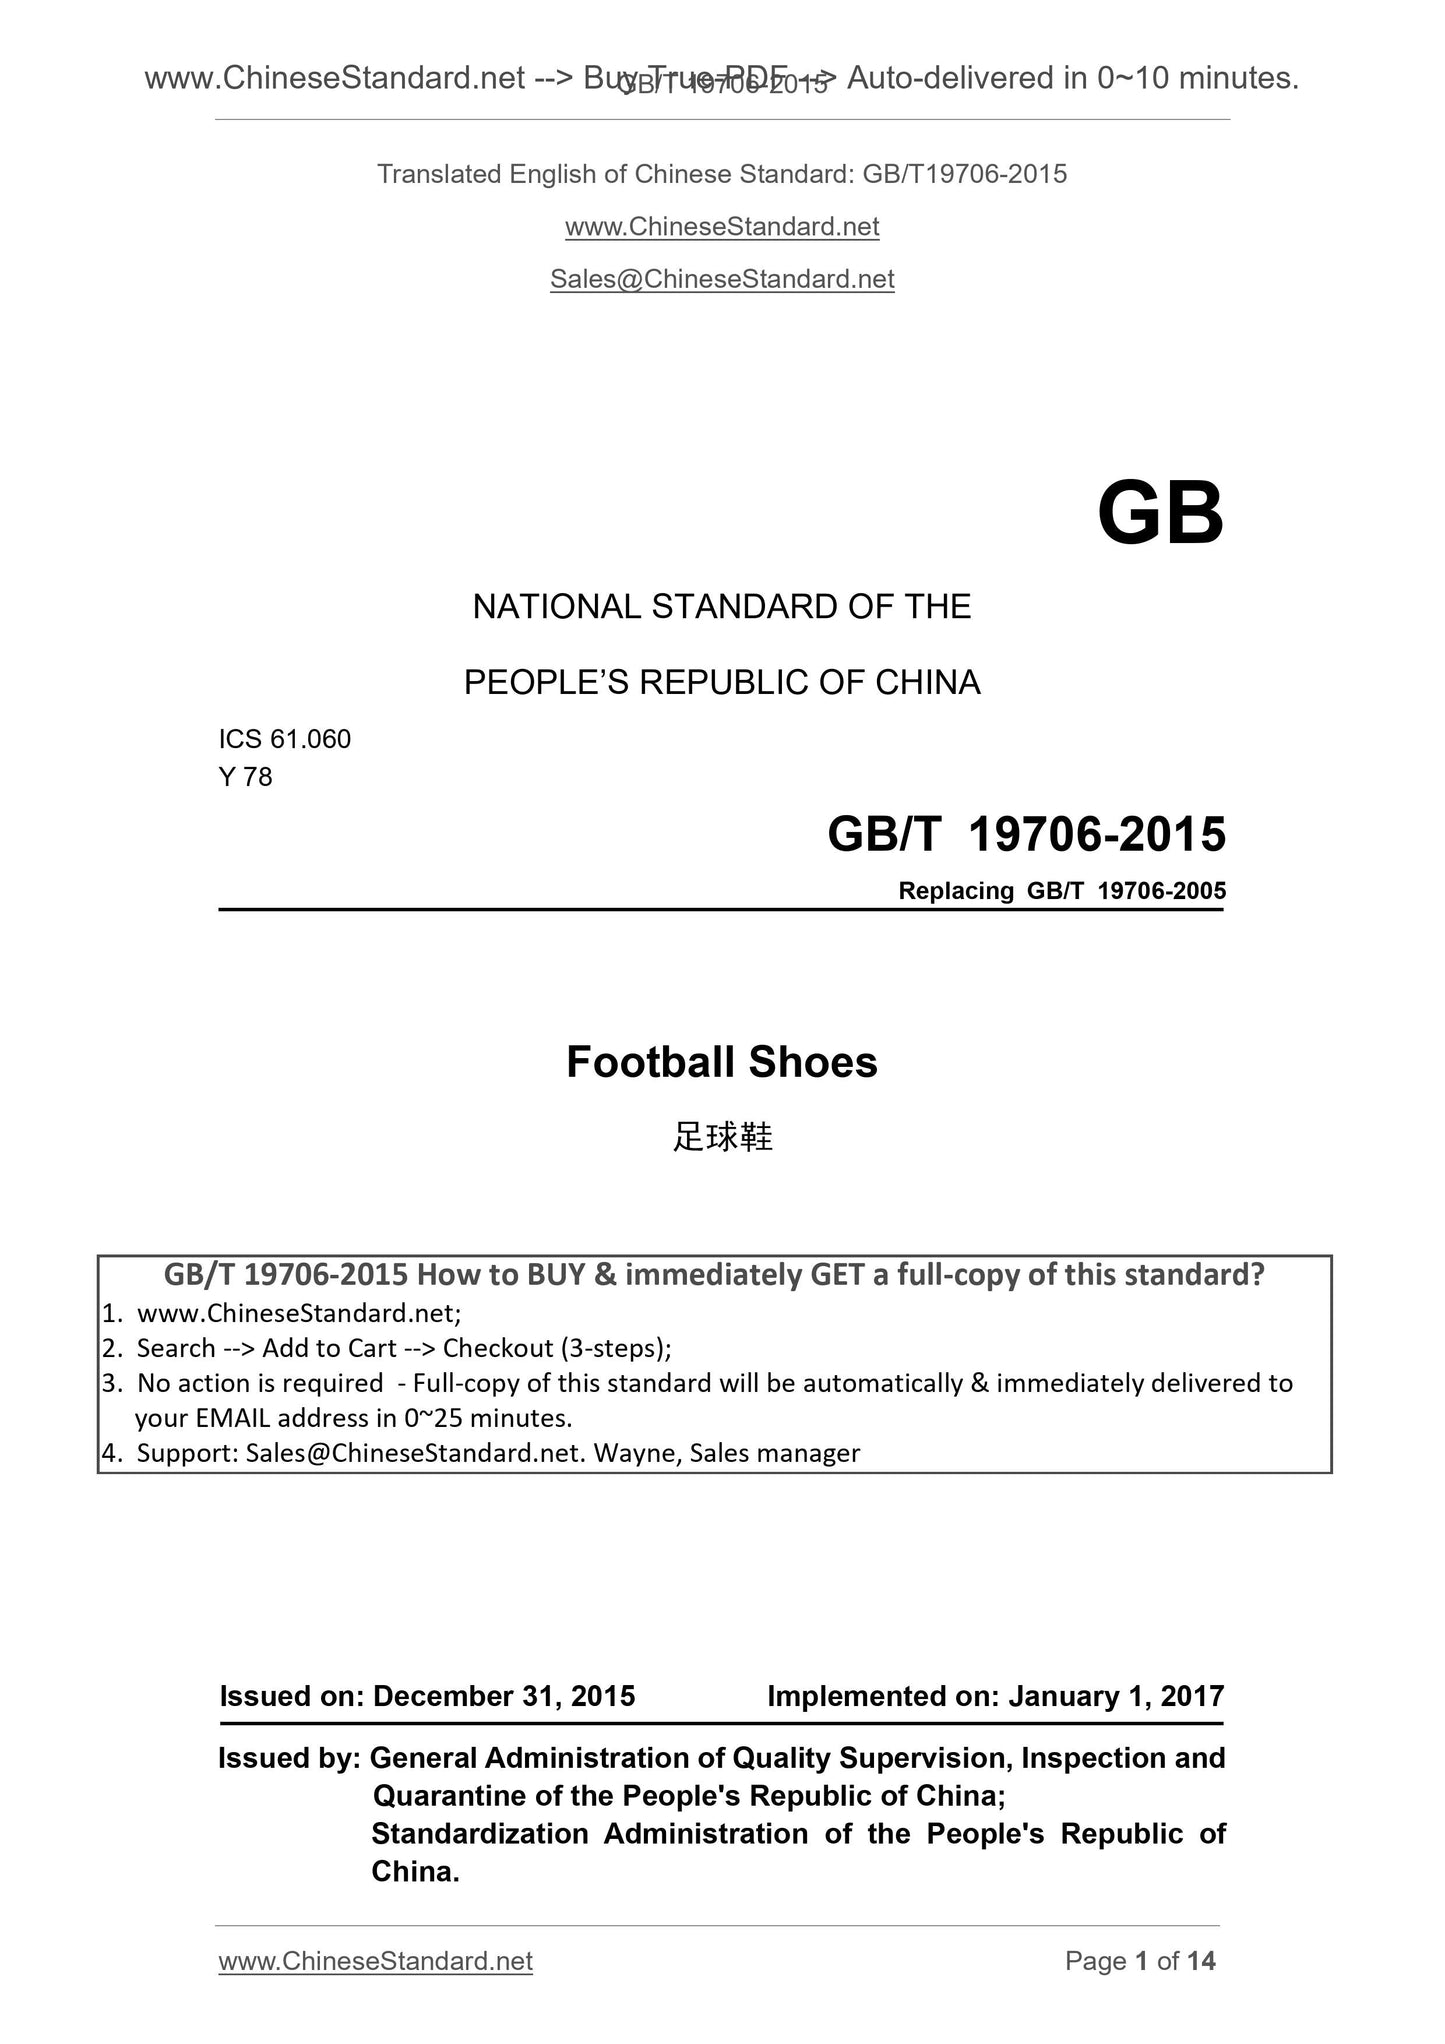 GB/T 19706-2015 Page 1